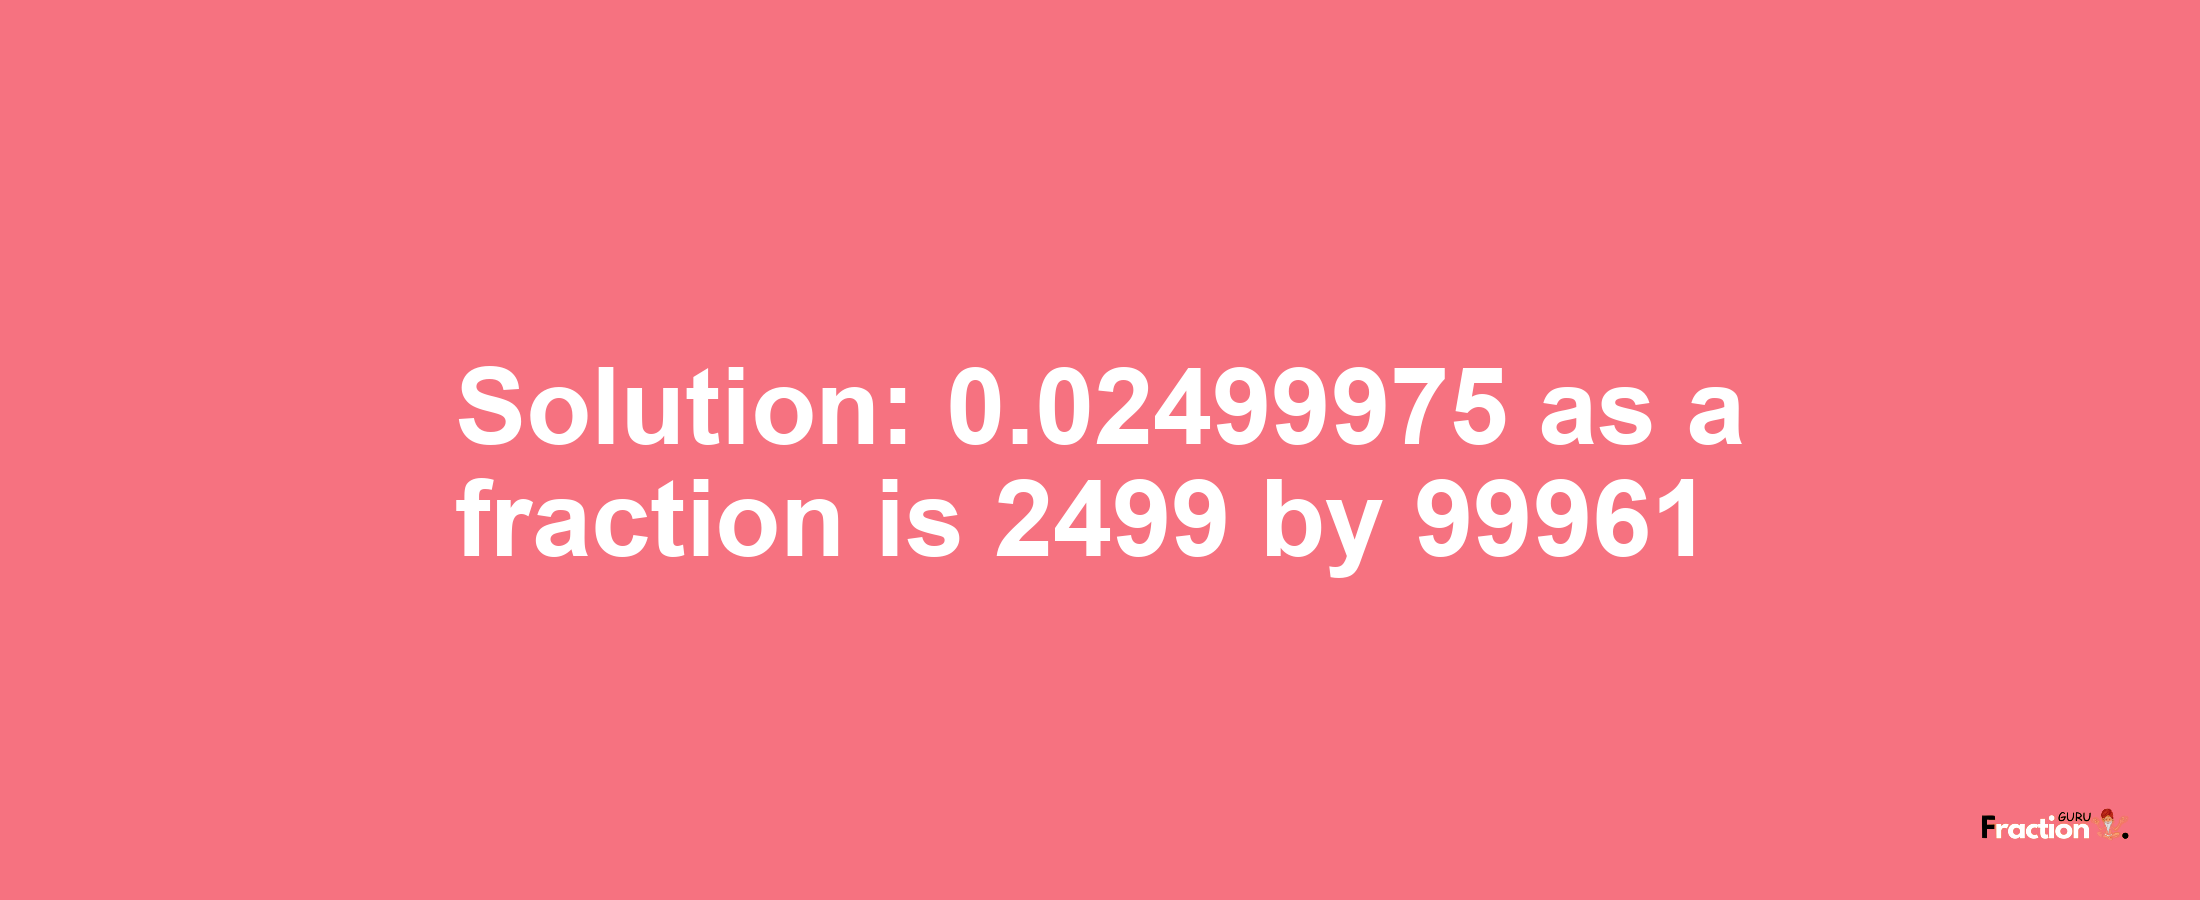 Solution:0.02499975 as a fraction is 2499/99961